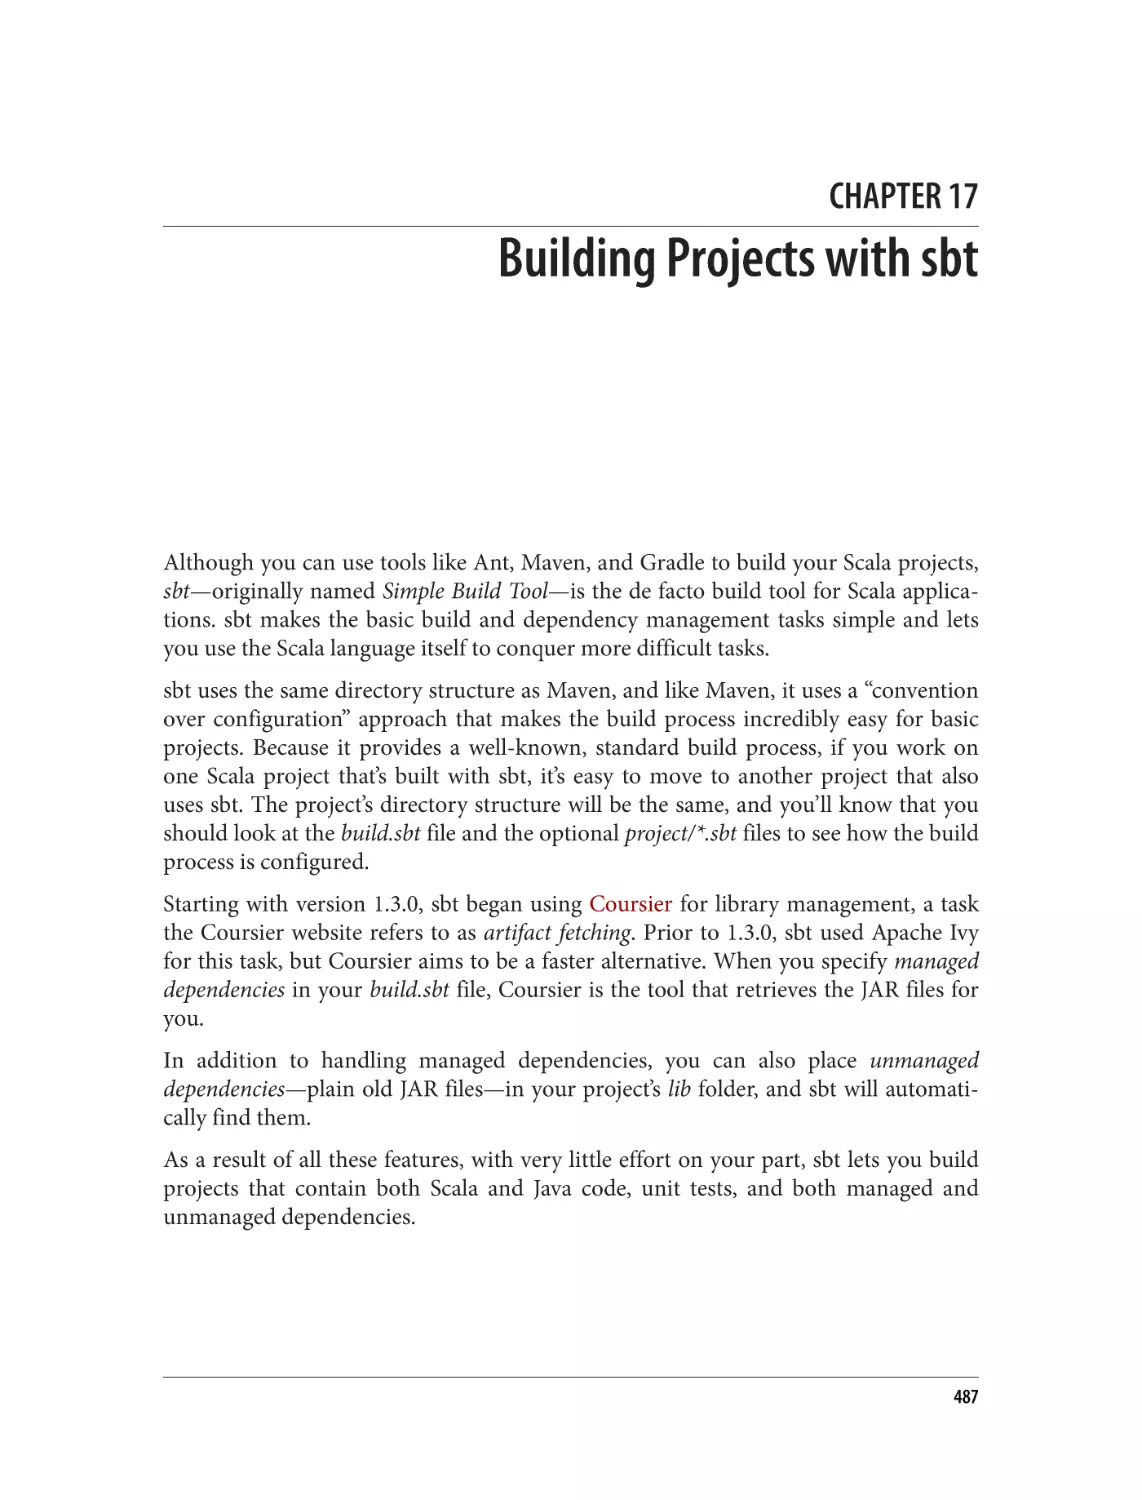 Chapter 17. Building Projects with sbt